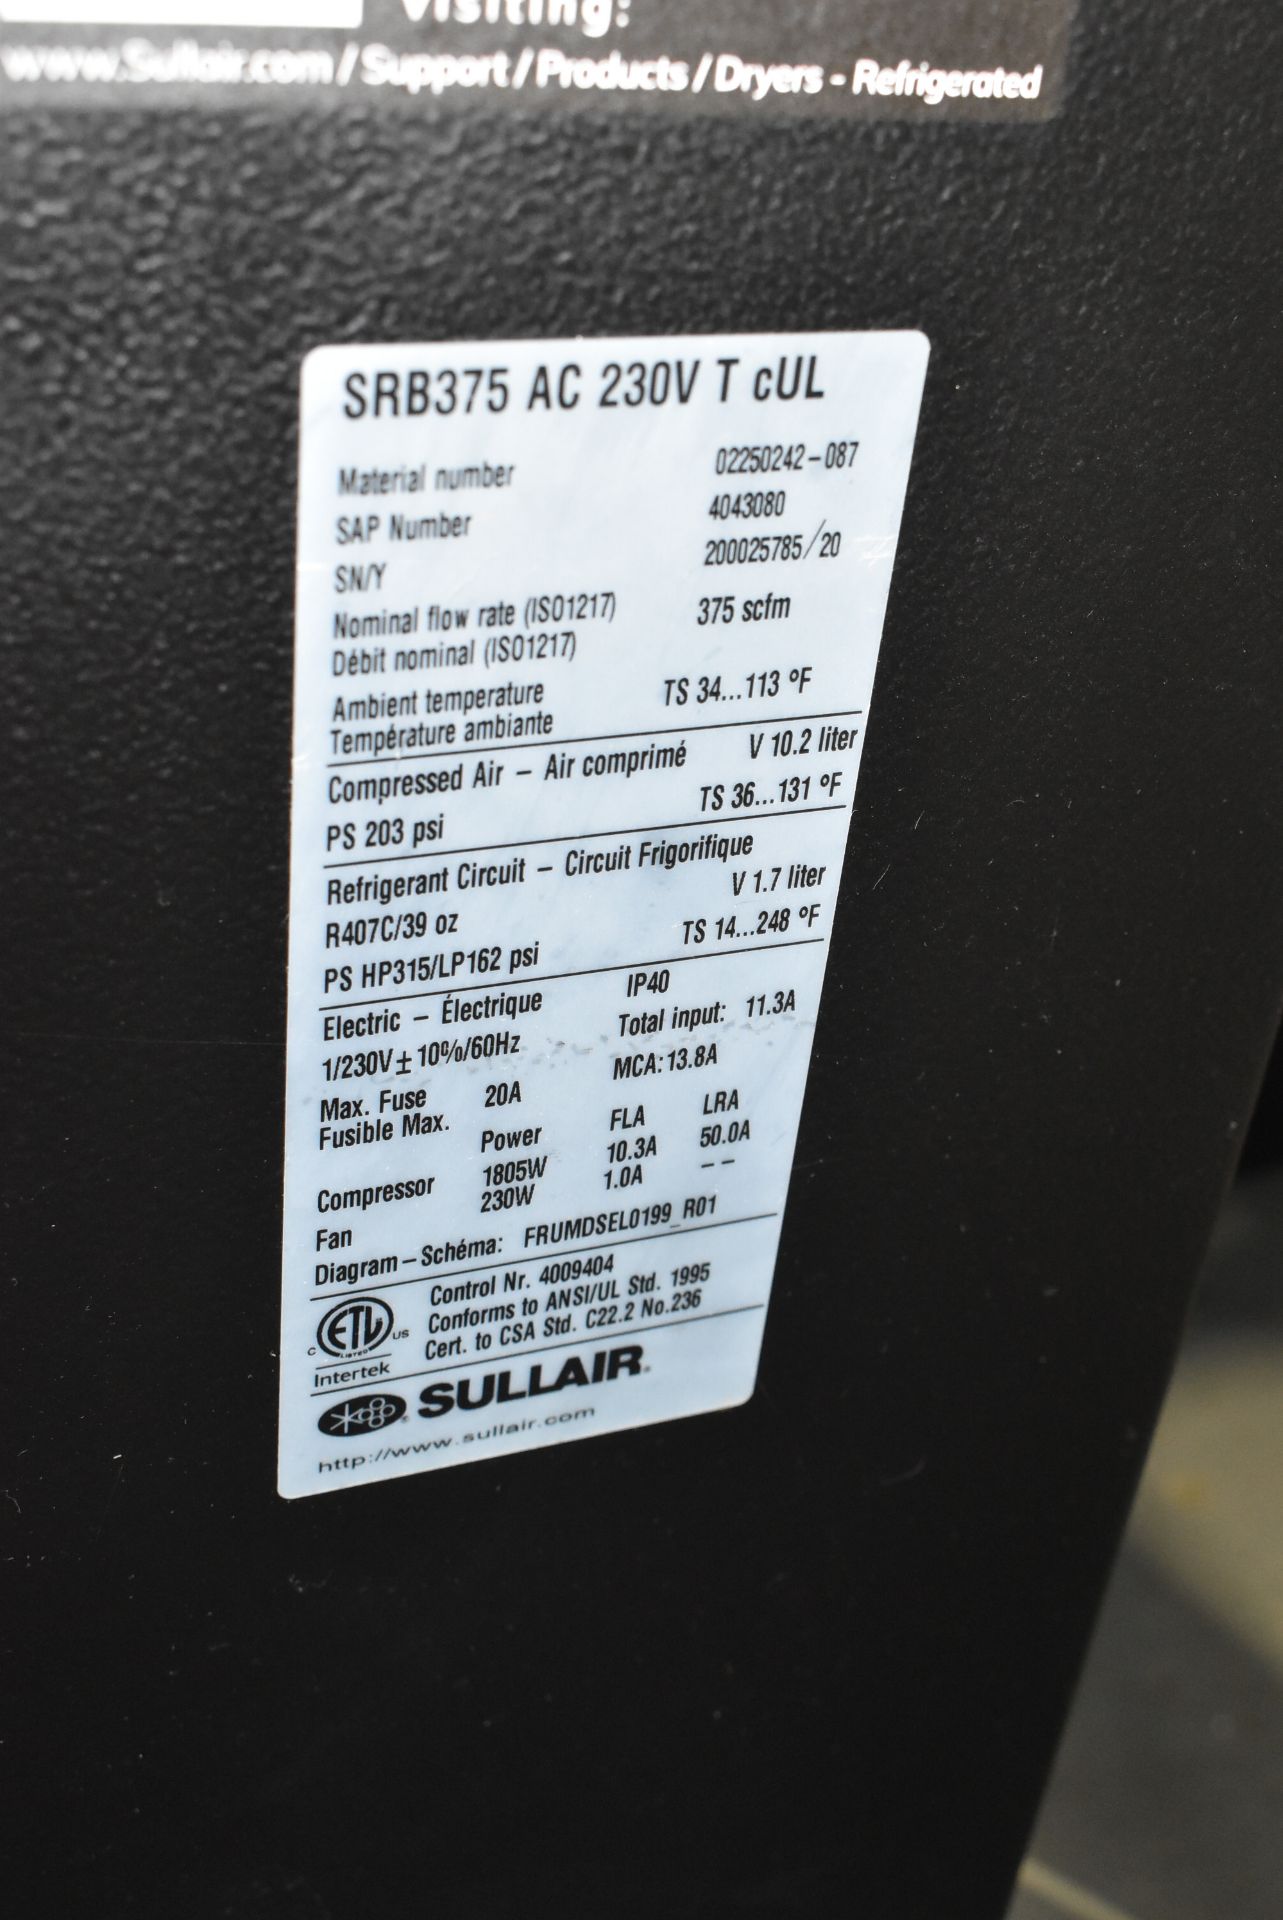 SULLAIR SRB375 REFRIGERATED AIR DRYER WITH 375 SCFM NOMINAL FLOW RATE, 203 PSI MAXIMUM AIR PRESSURE, - Image 4 of 4